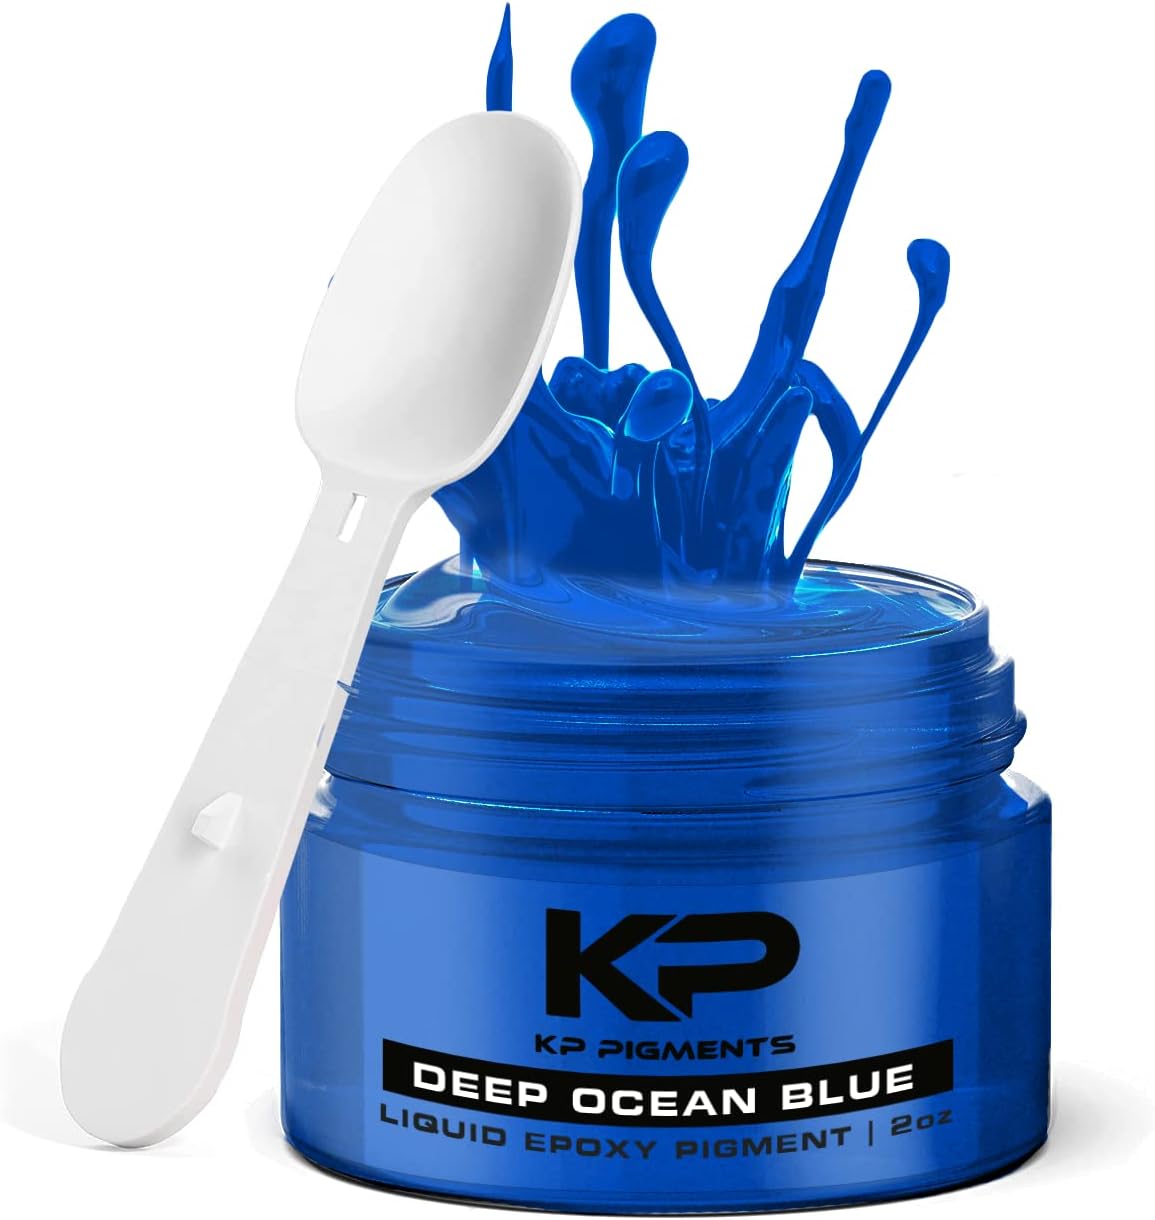 Load image into Gallery viewer, Deep Ocean Blue - Epoxy Pigment Paste for Epoxy Resin, Tint/Pigment Paste with Spoon for Arts and Crafts, Jewelry, Resin Woodworking and More!